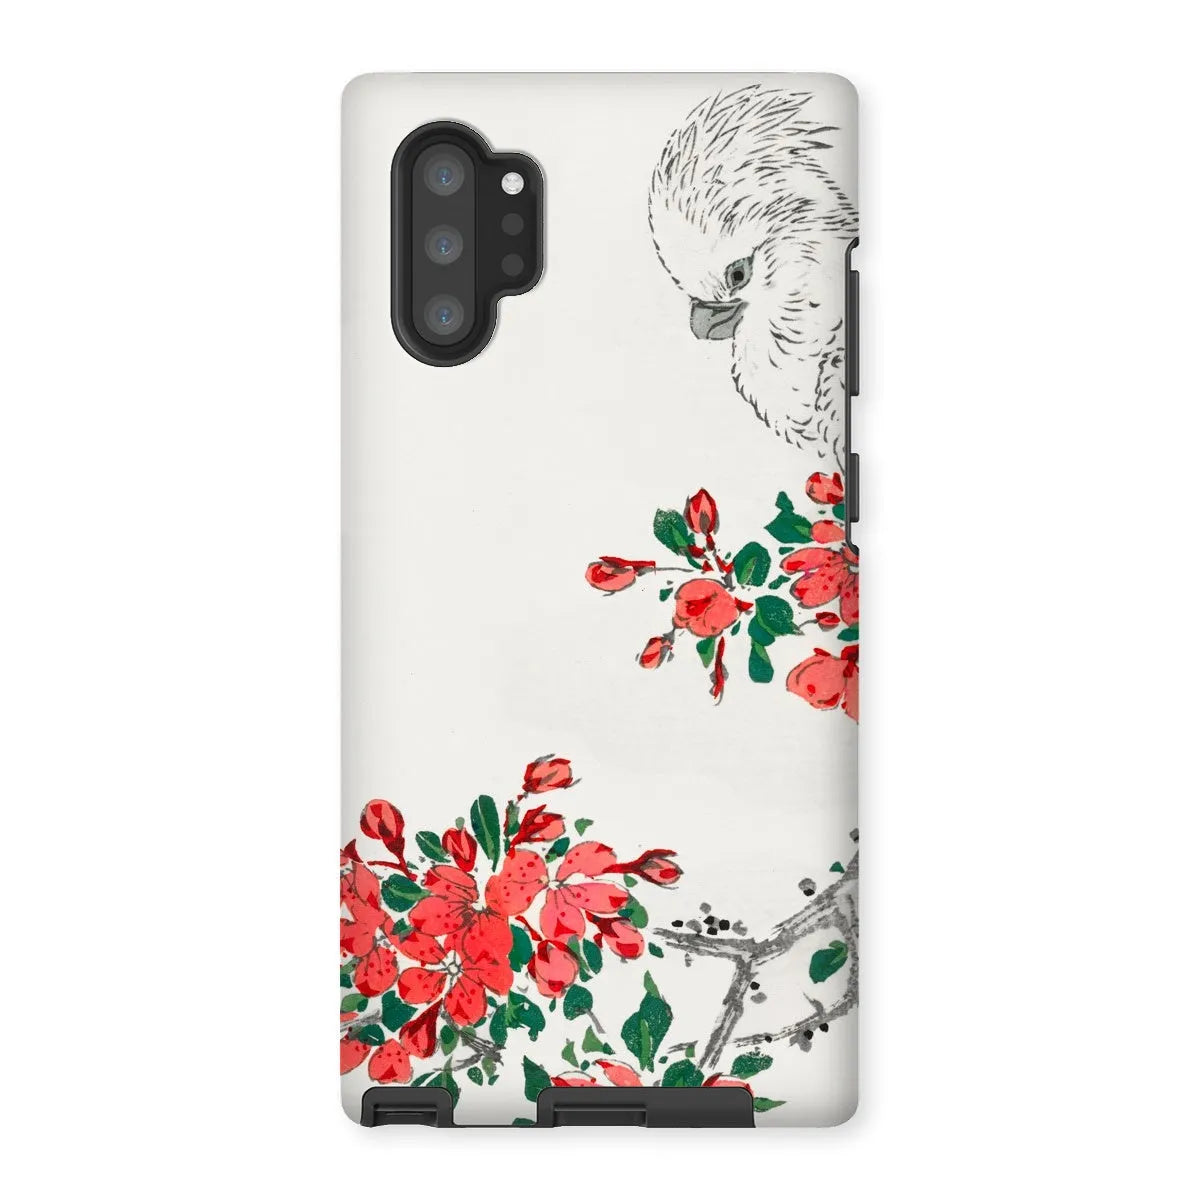 Parrot And Pyrus - Japanese Bird Phone Case - Numata Kashu - Samsung Galaxy Note 10p / Matte - Mobile Phone Cases